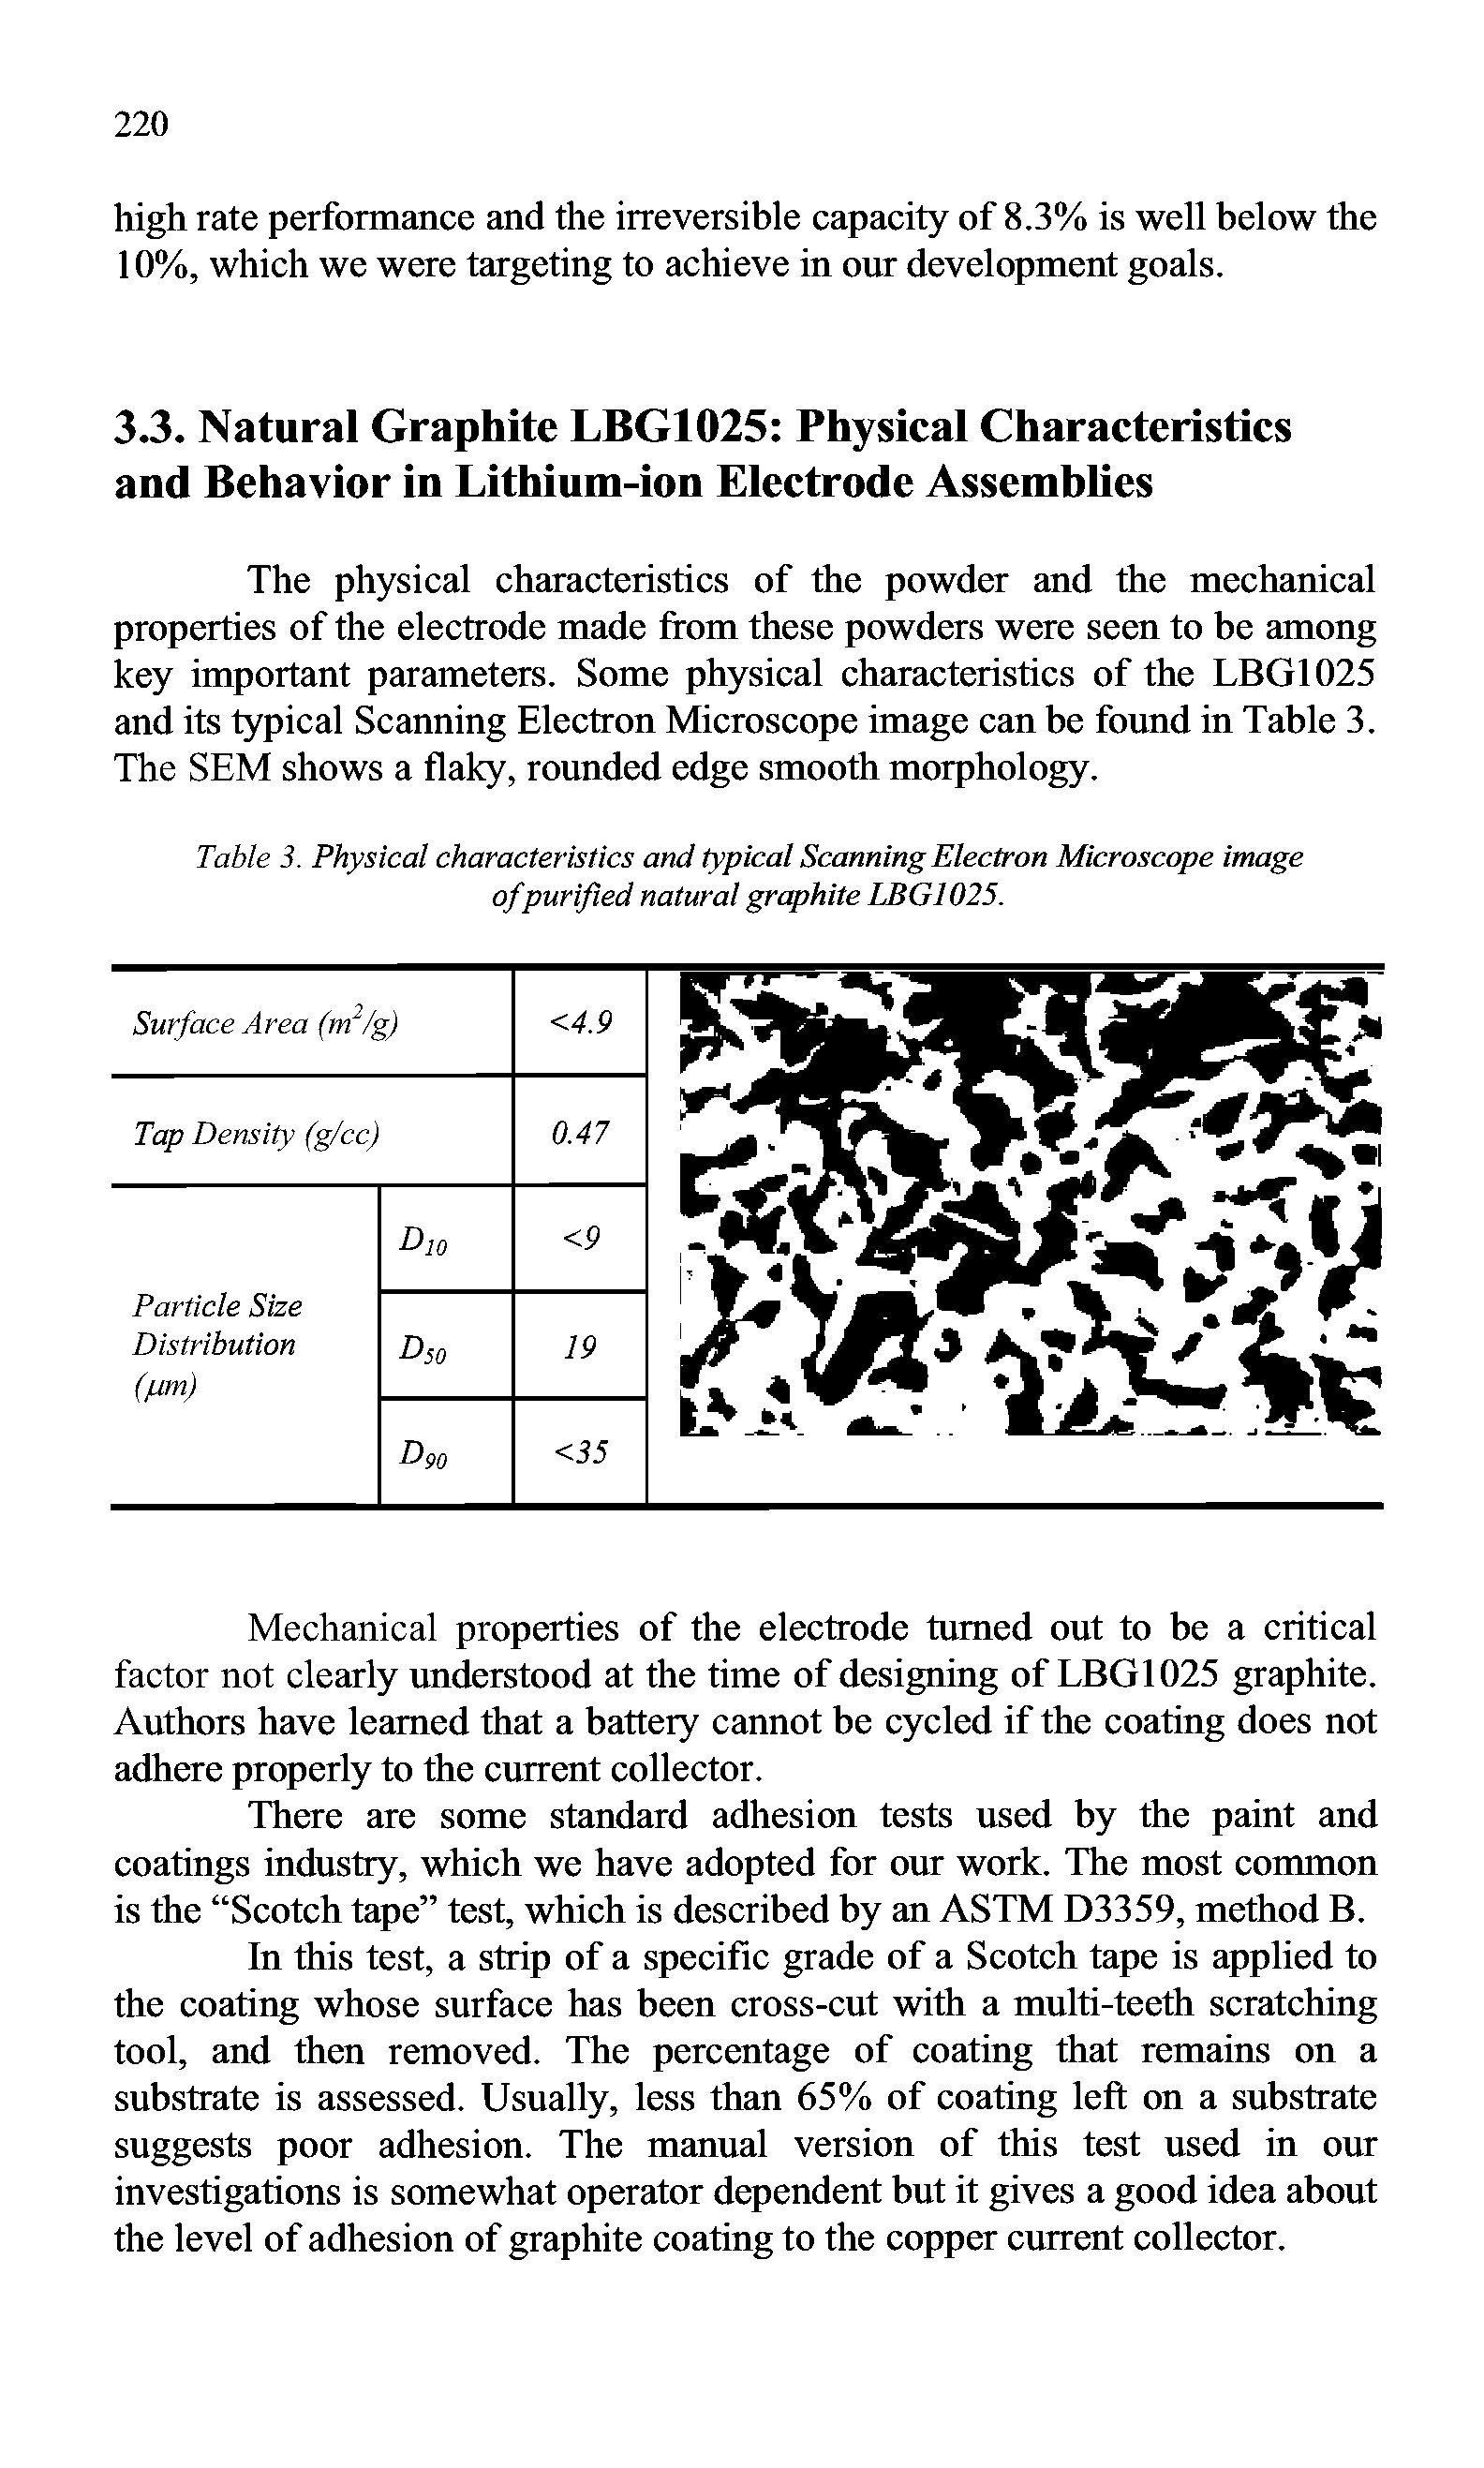 Table 3. Physical characteristics and typical Scanning Electron Microscope image of purified natural graphite LBG1025.